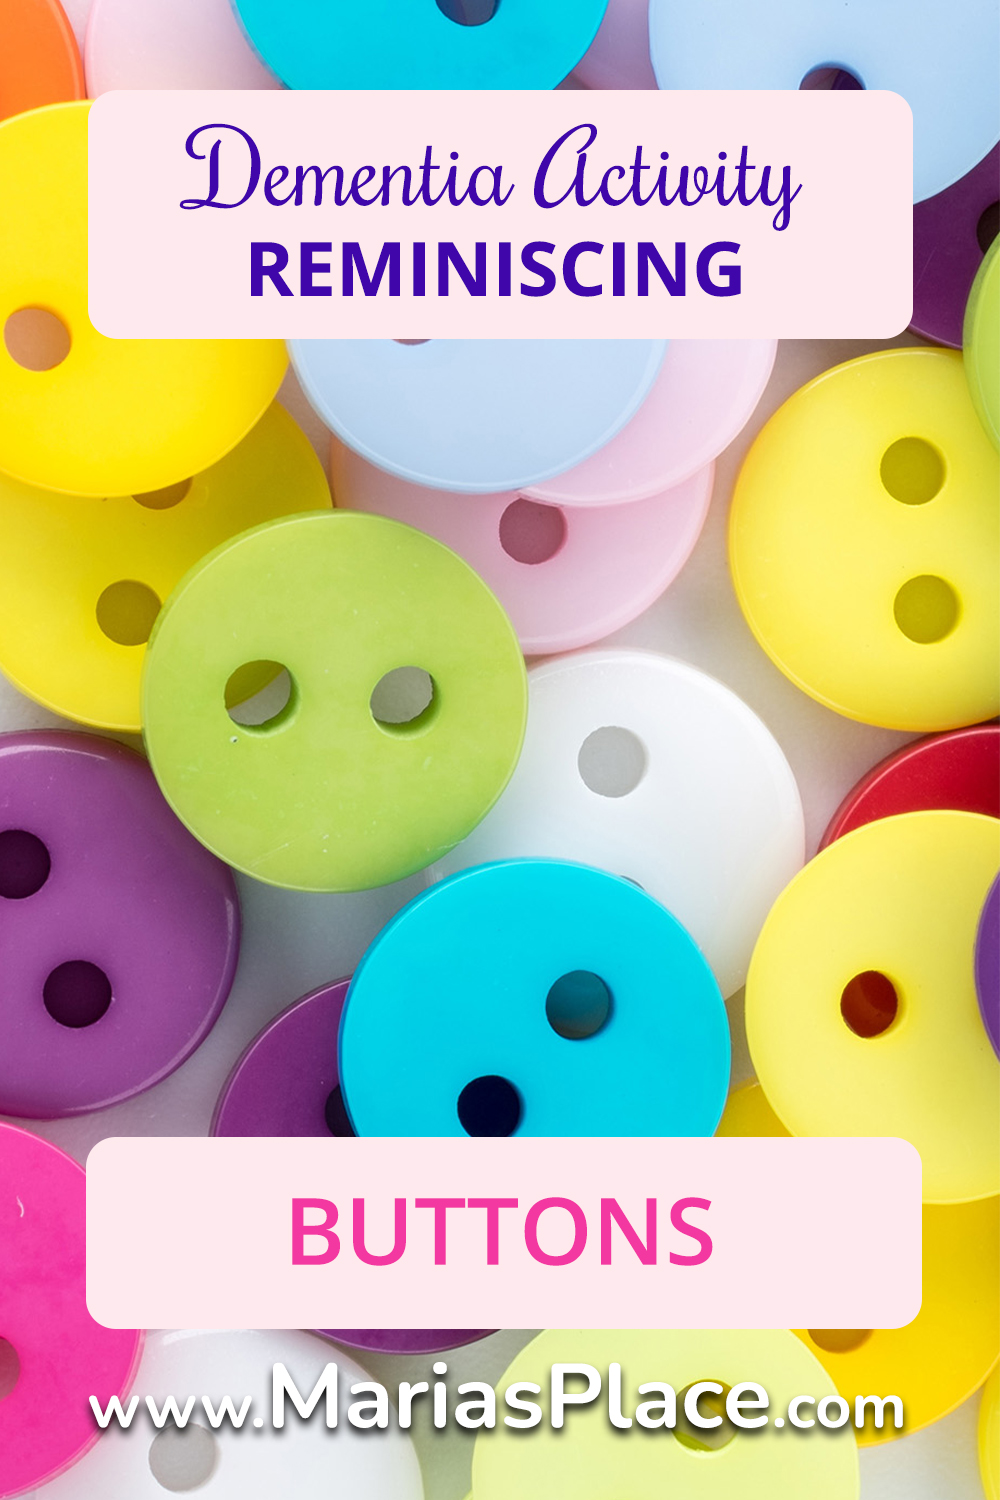 Buttons as Reminiscence